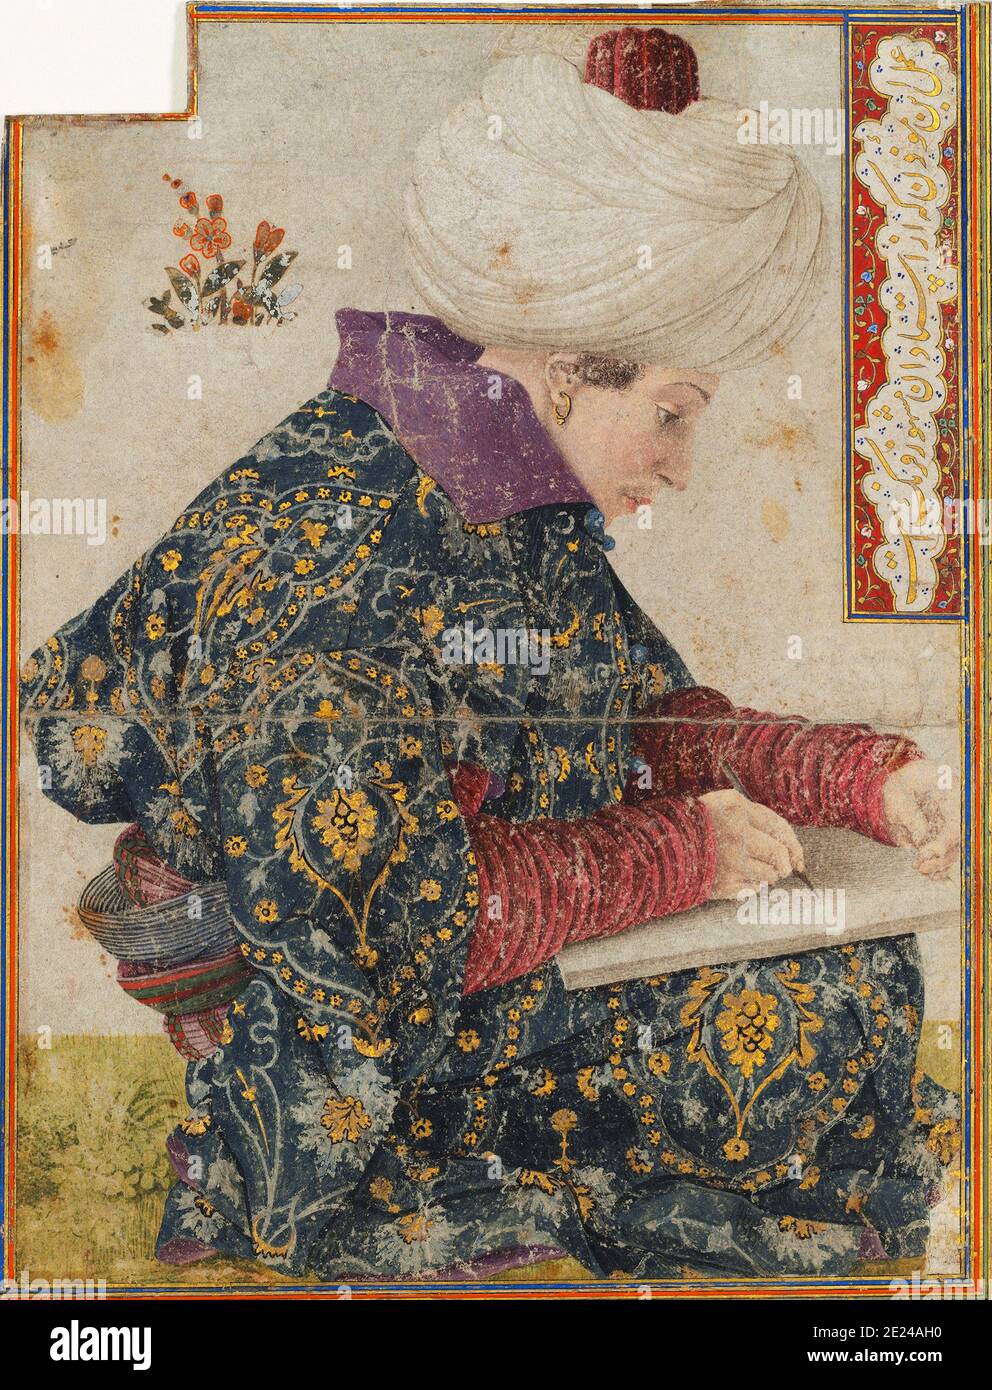 Turkey: 'Seated Scribe'. Portrait drawing by Venetian artist Gentile Bellini (1429-1507), c. 1479-1481.  Now housed at the Isabella Stewart Gardner Museum in Boston, this painting reflects Bellini’s passion for Eastern cultures. Originally commissioned by Fatih Sultan Mehmet II in 1479 to go to Constantinople to paint portraits of the sultan for two years, the Venetian painter was strongly influenced by Ottoman traditions and fashions. Stock Photo